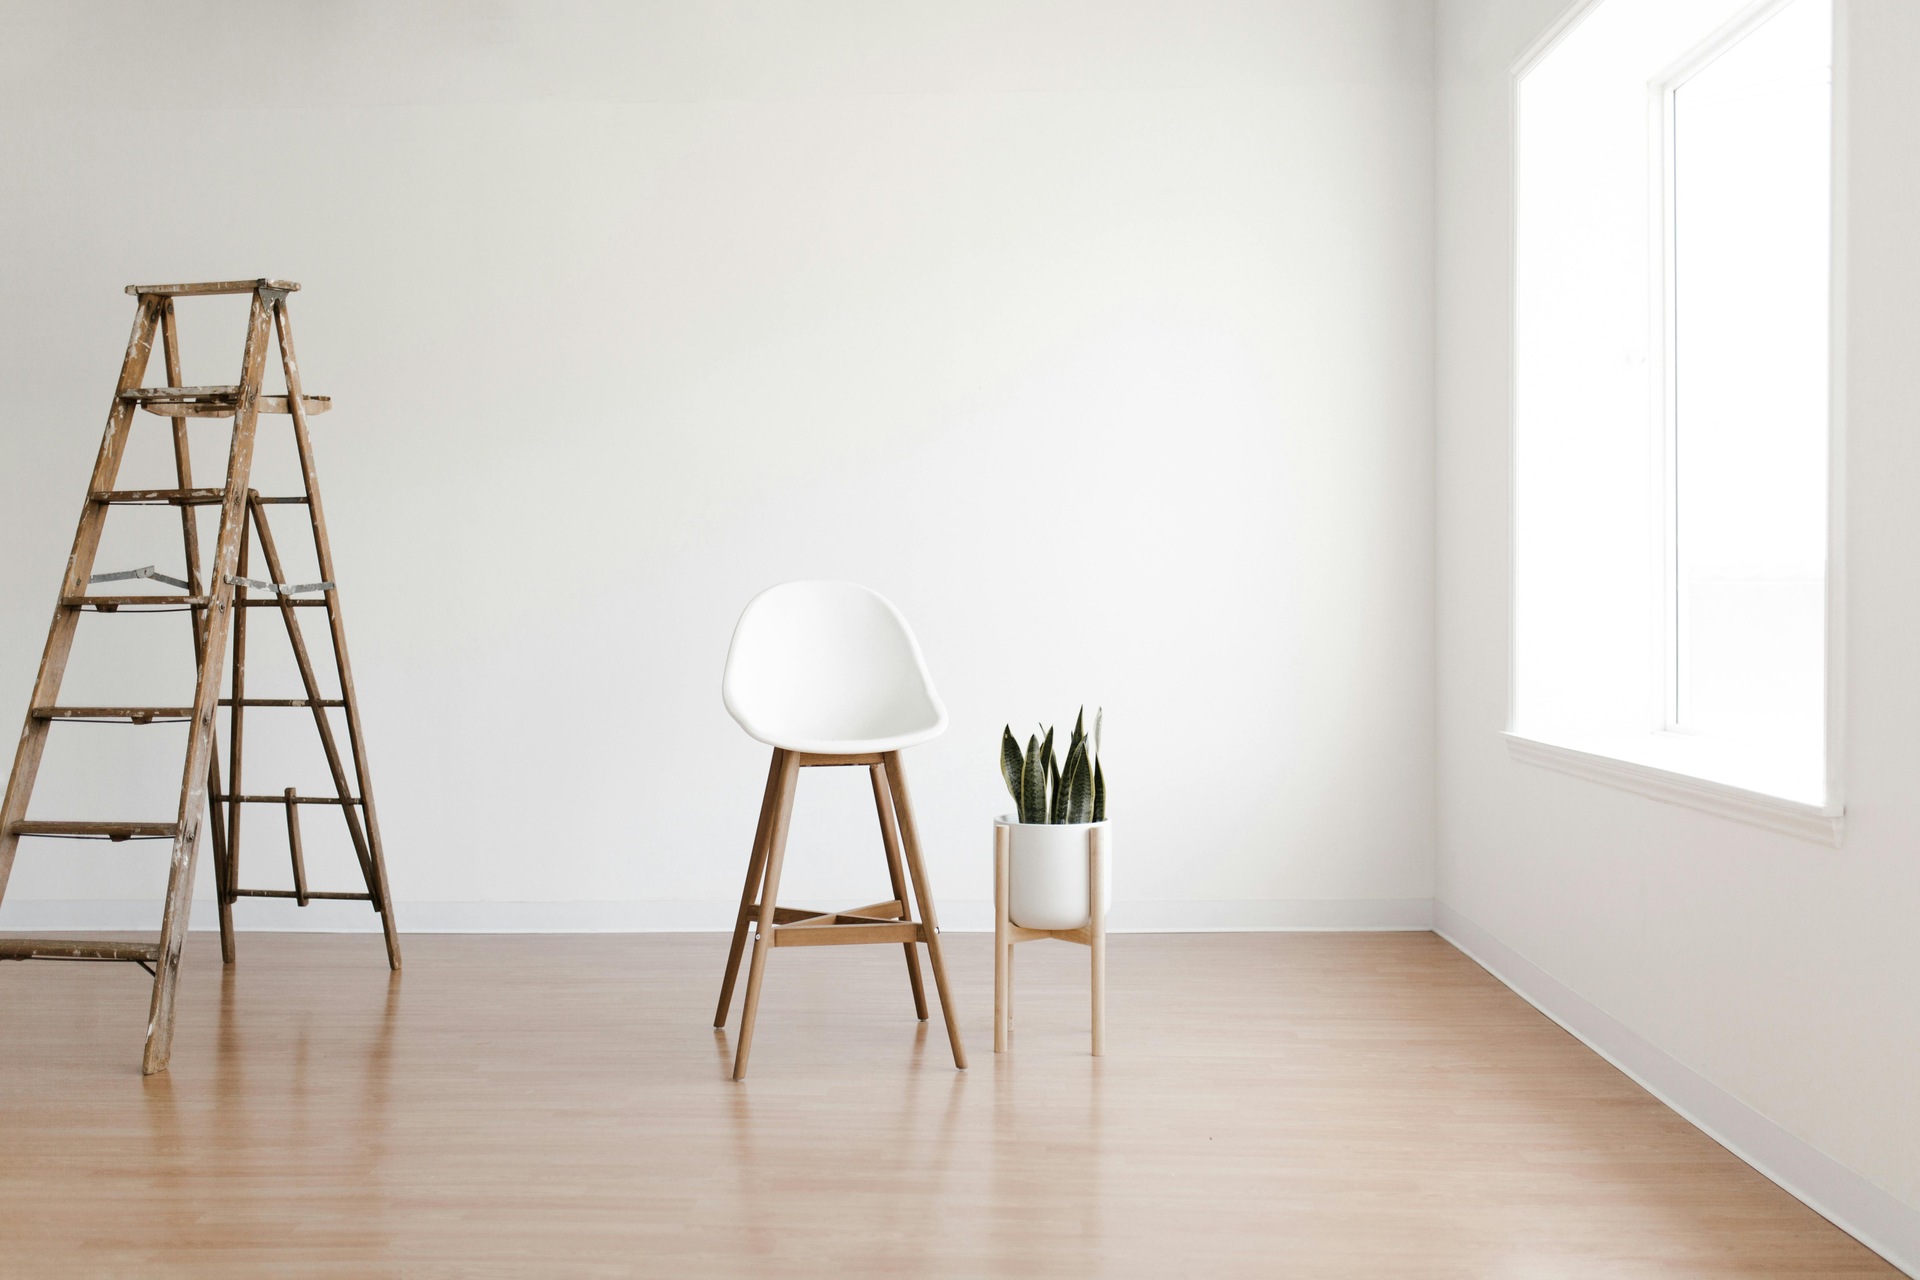 A white chair and a potted plant on a wooden floor